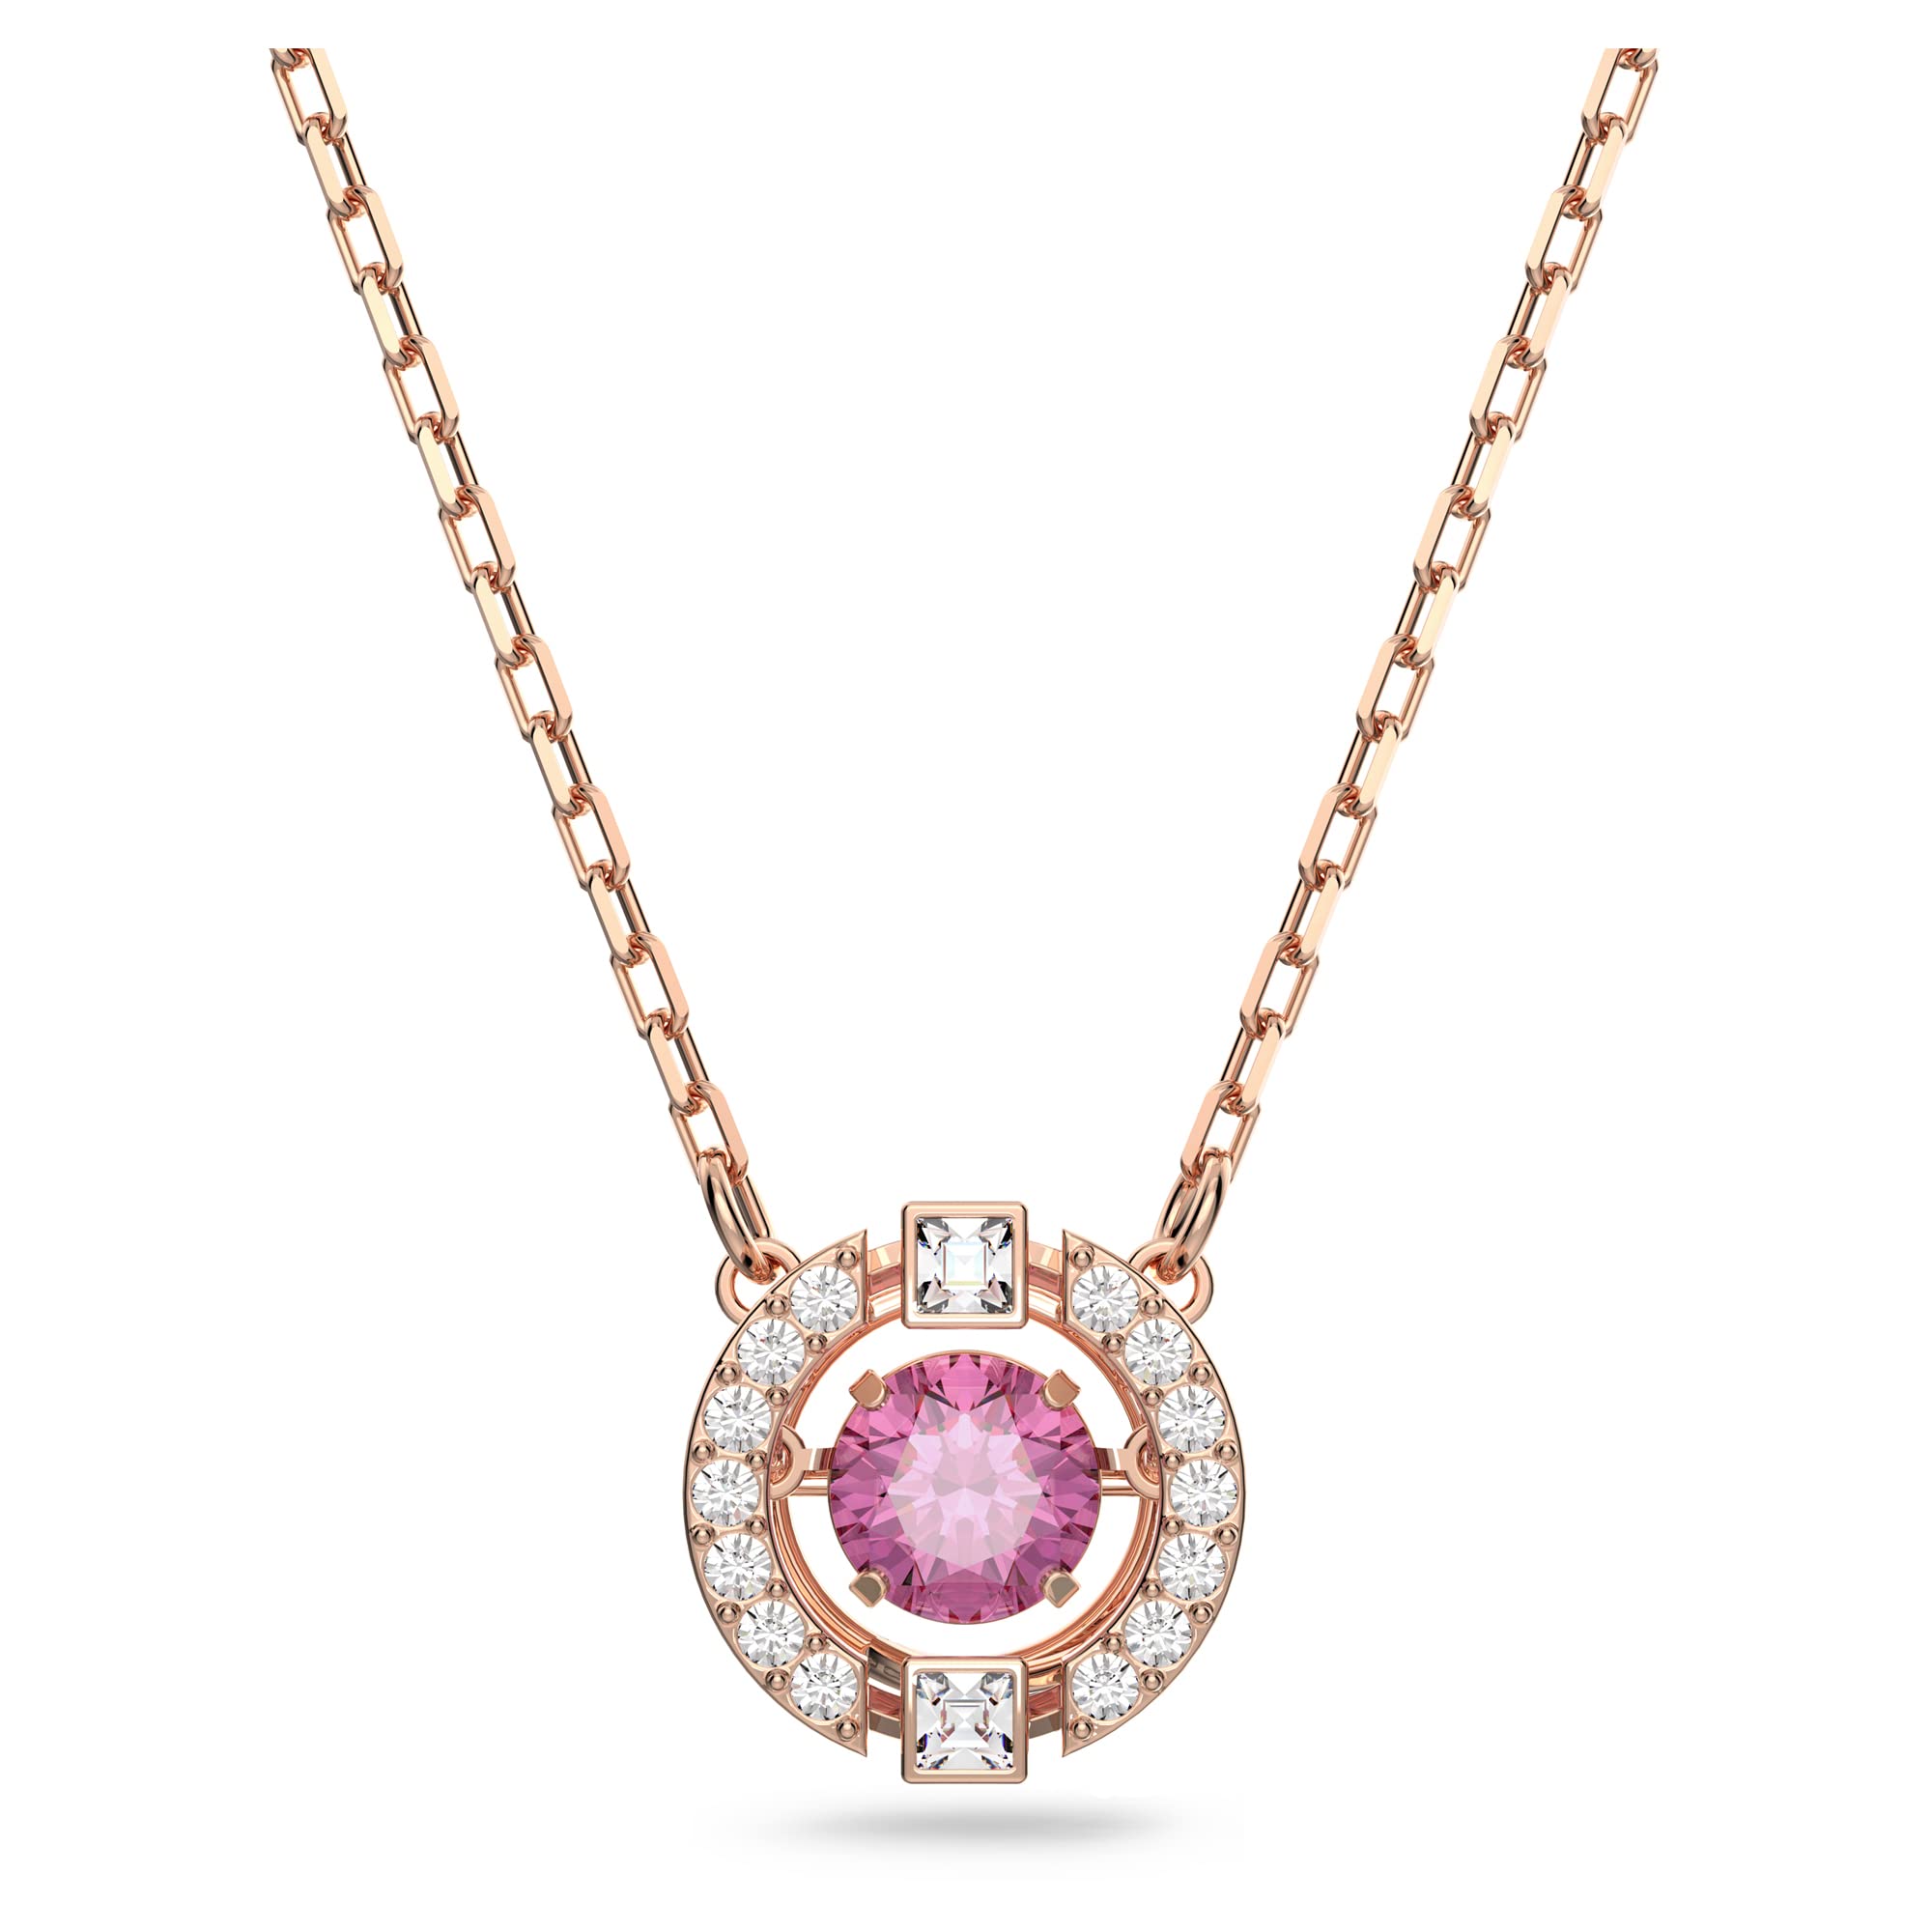 SWAROVSKI Womens Sparkling Dance Round Necklace, Red, Rose-gold tone plated